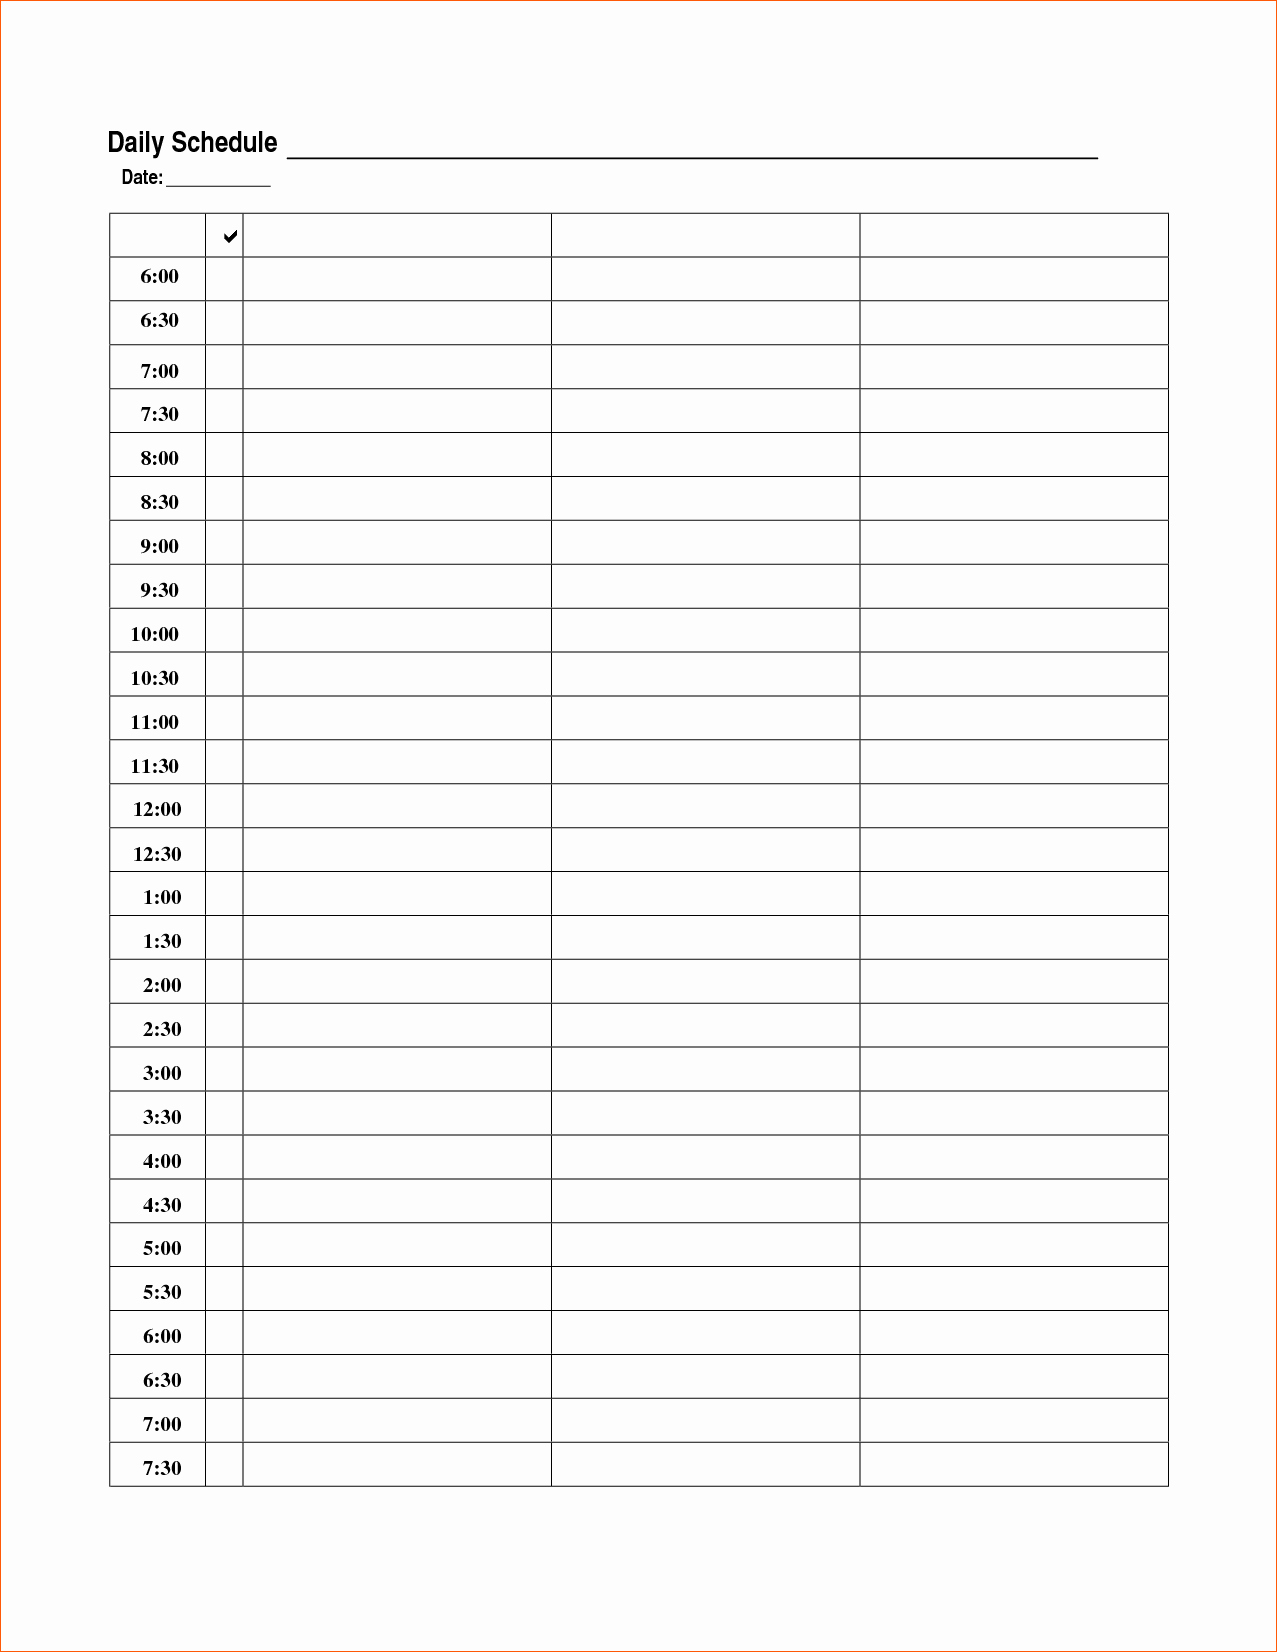 Daily Schedule Template Pdf Beautiful 10 Daily Schedule Template Pdf